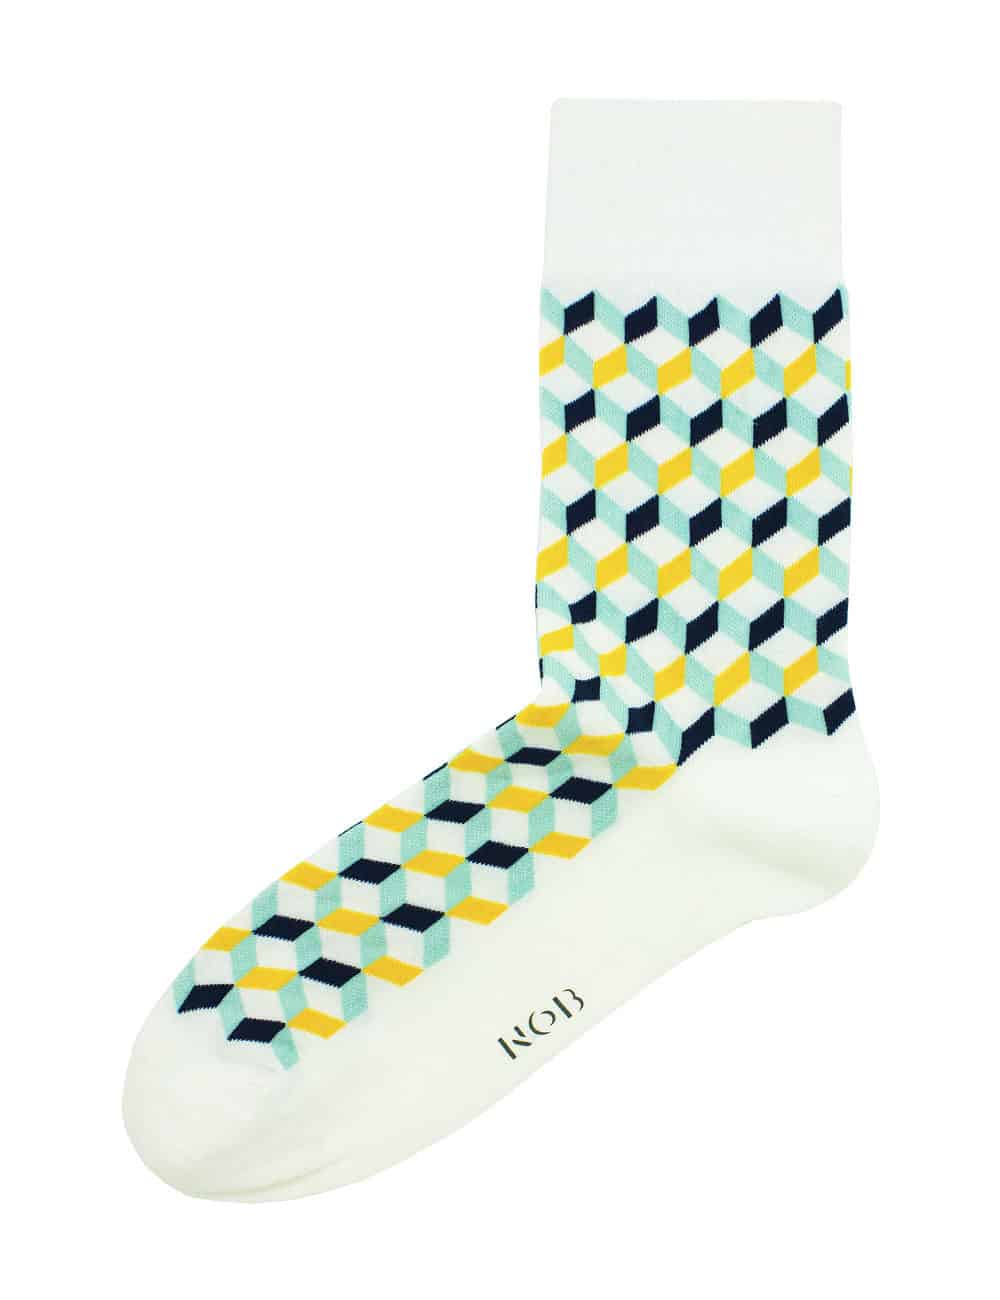 White with Yellow Geometric Design Crew Socks made with Premium Combed Cotton SOC6A.NOB1